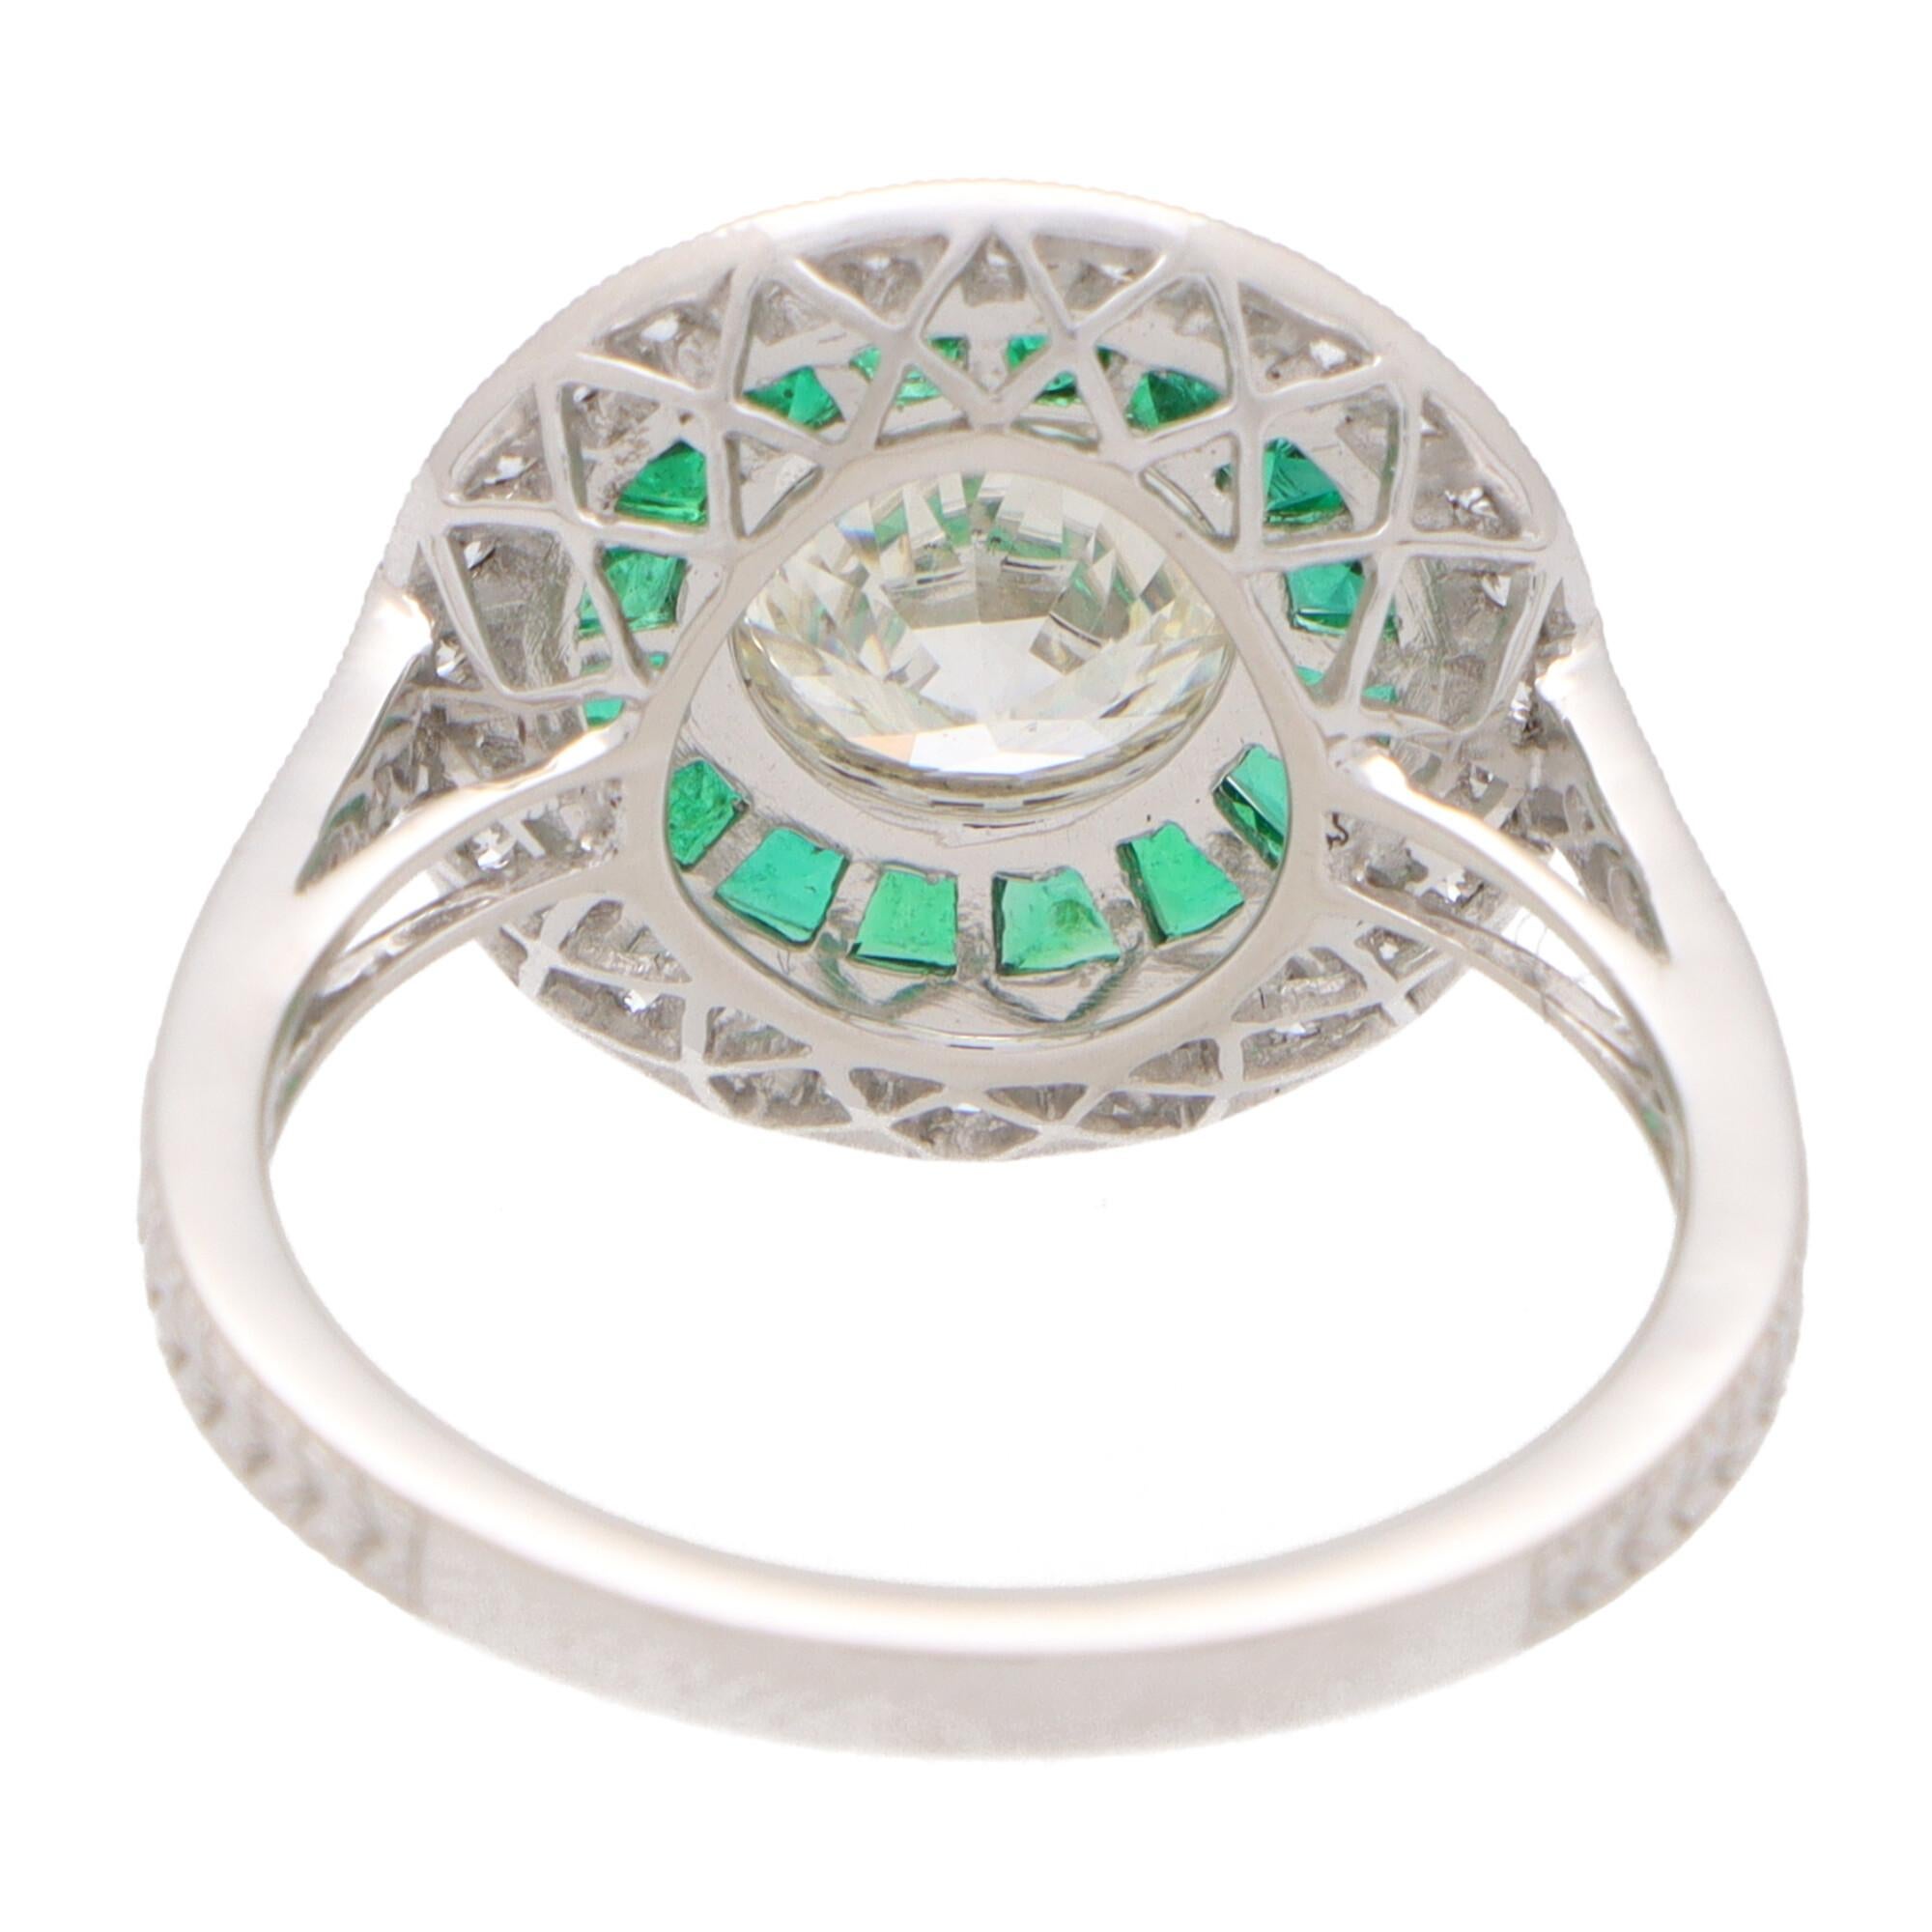 Old European Cut Art Deco Inspired Emerald and Diamond Target Halo Ring Set in Platinum